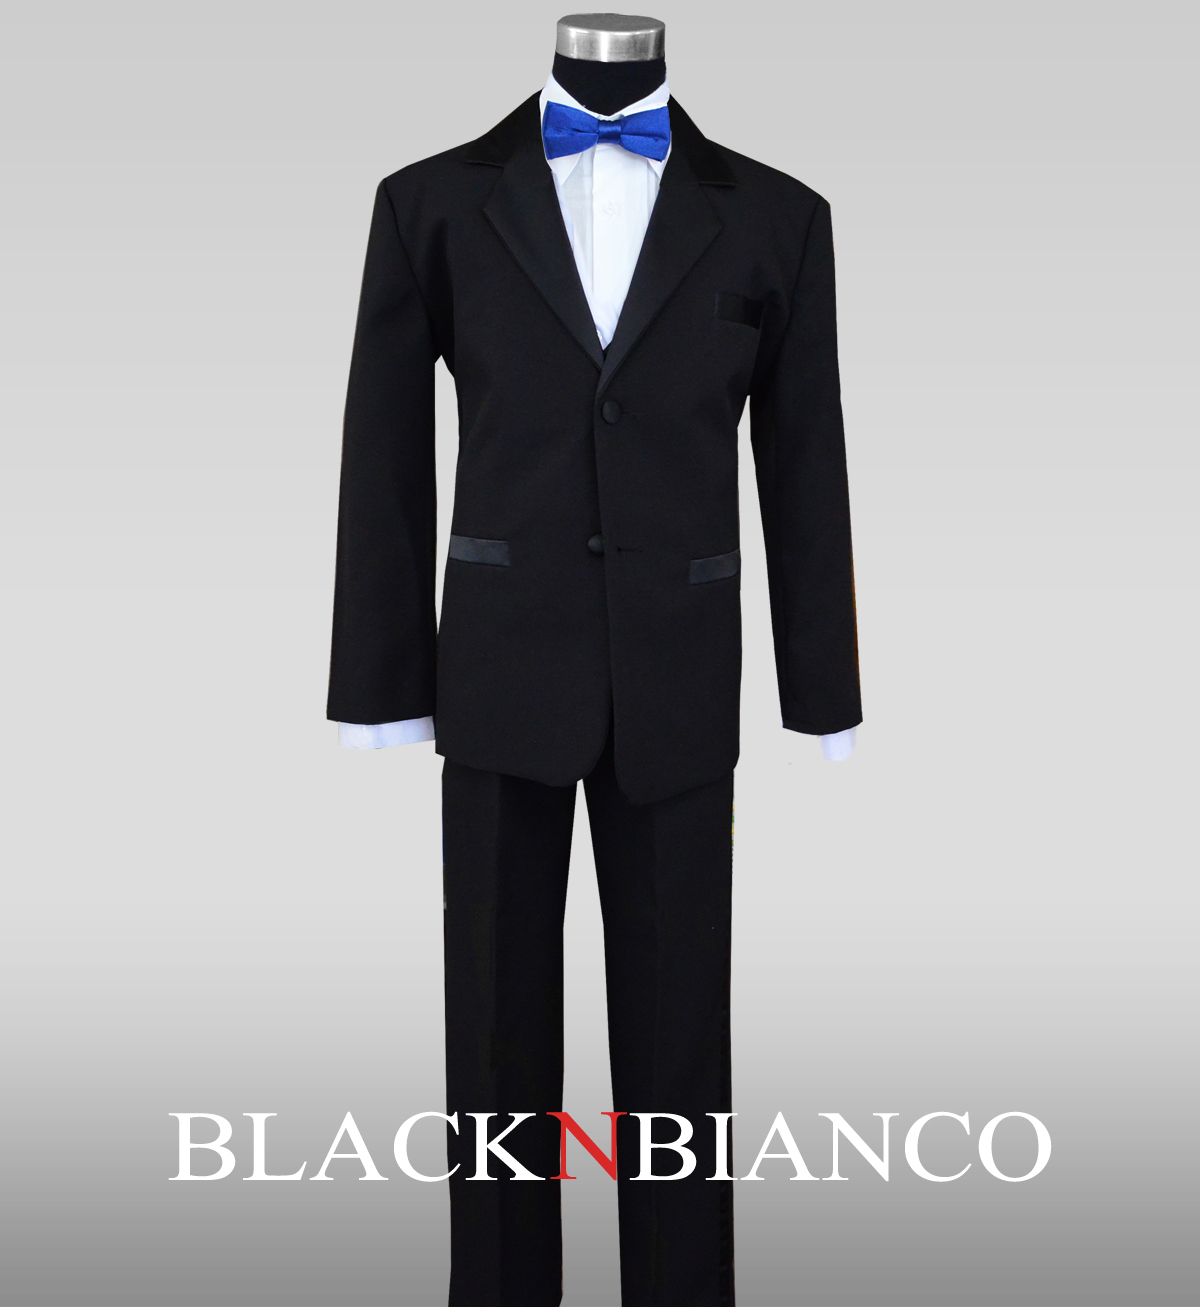 Boys Tuxedos in Black with Royal Blue Bow Tie and Black Bow Tie - image 2 of 5